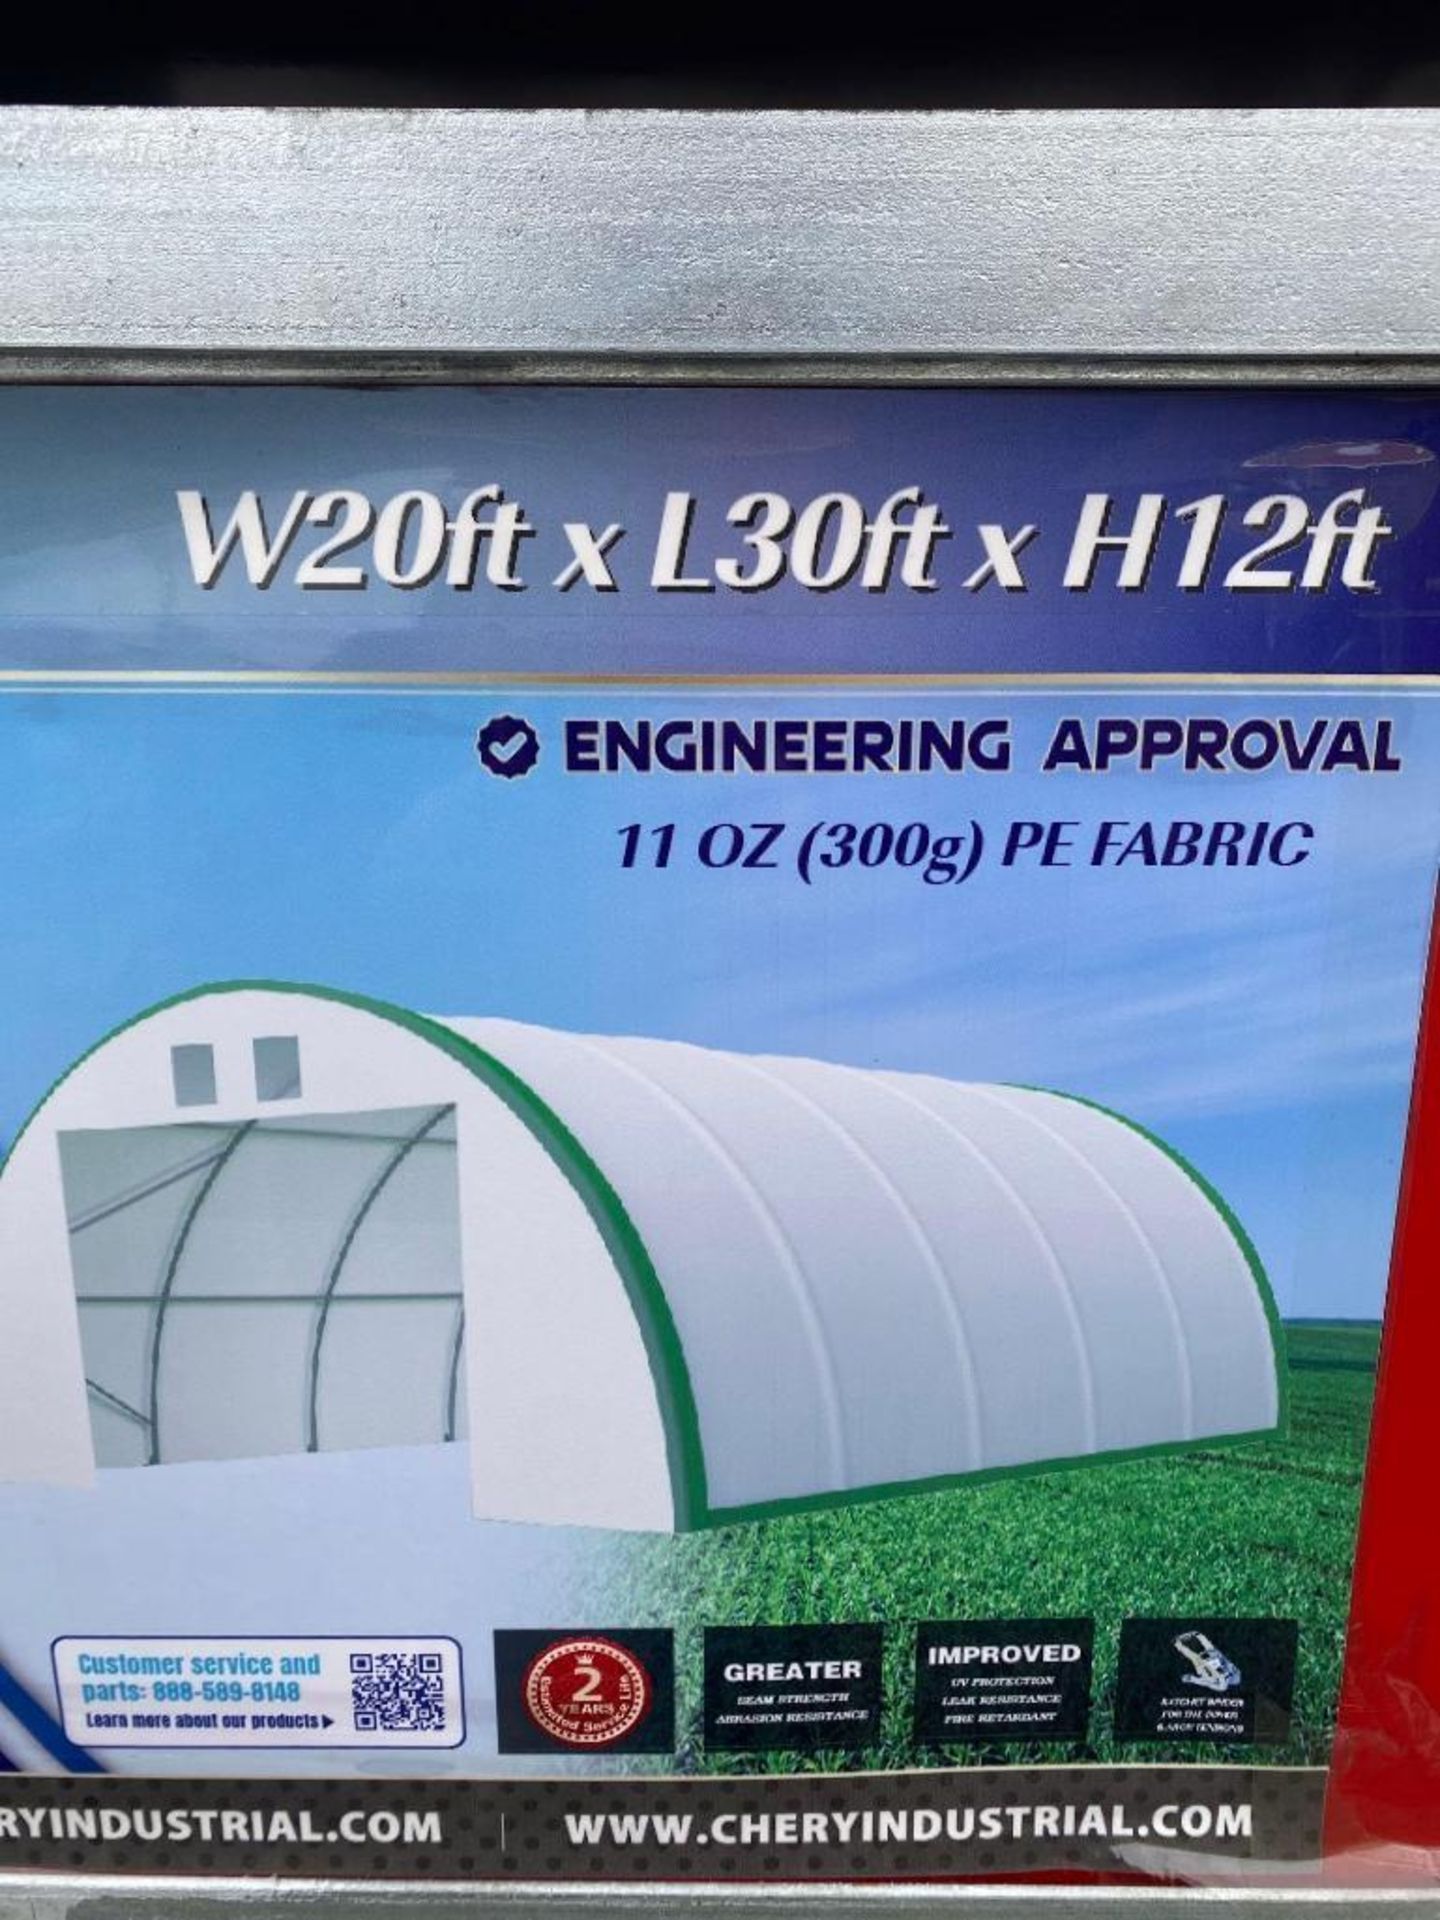 New Chery Industrial Co 20ft x 30ft x 12ft Storage Shelter - Image 4 of 5